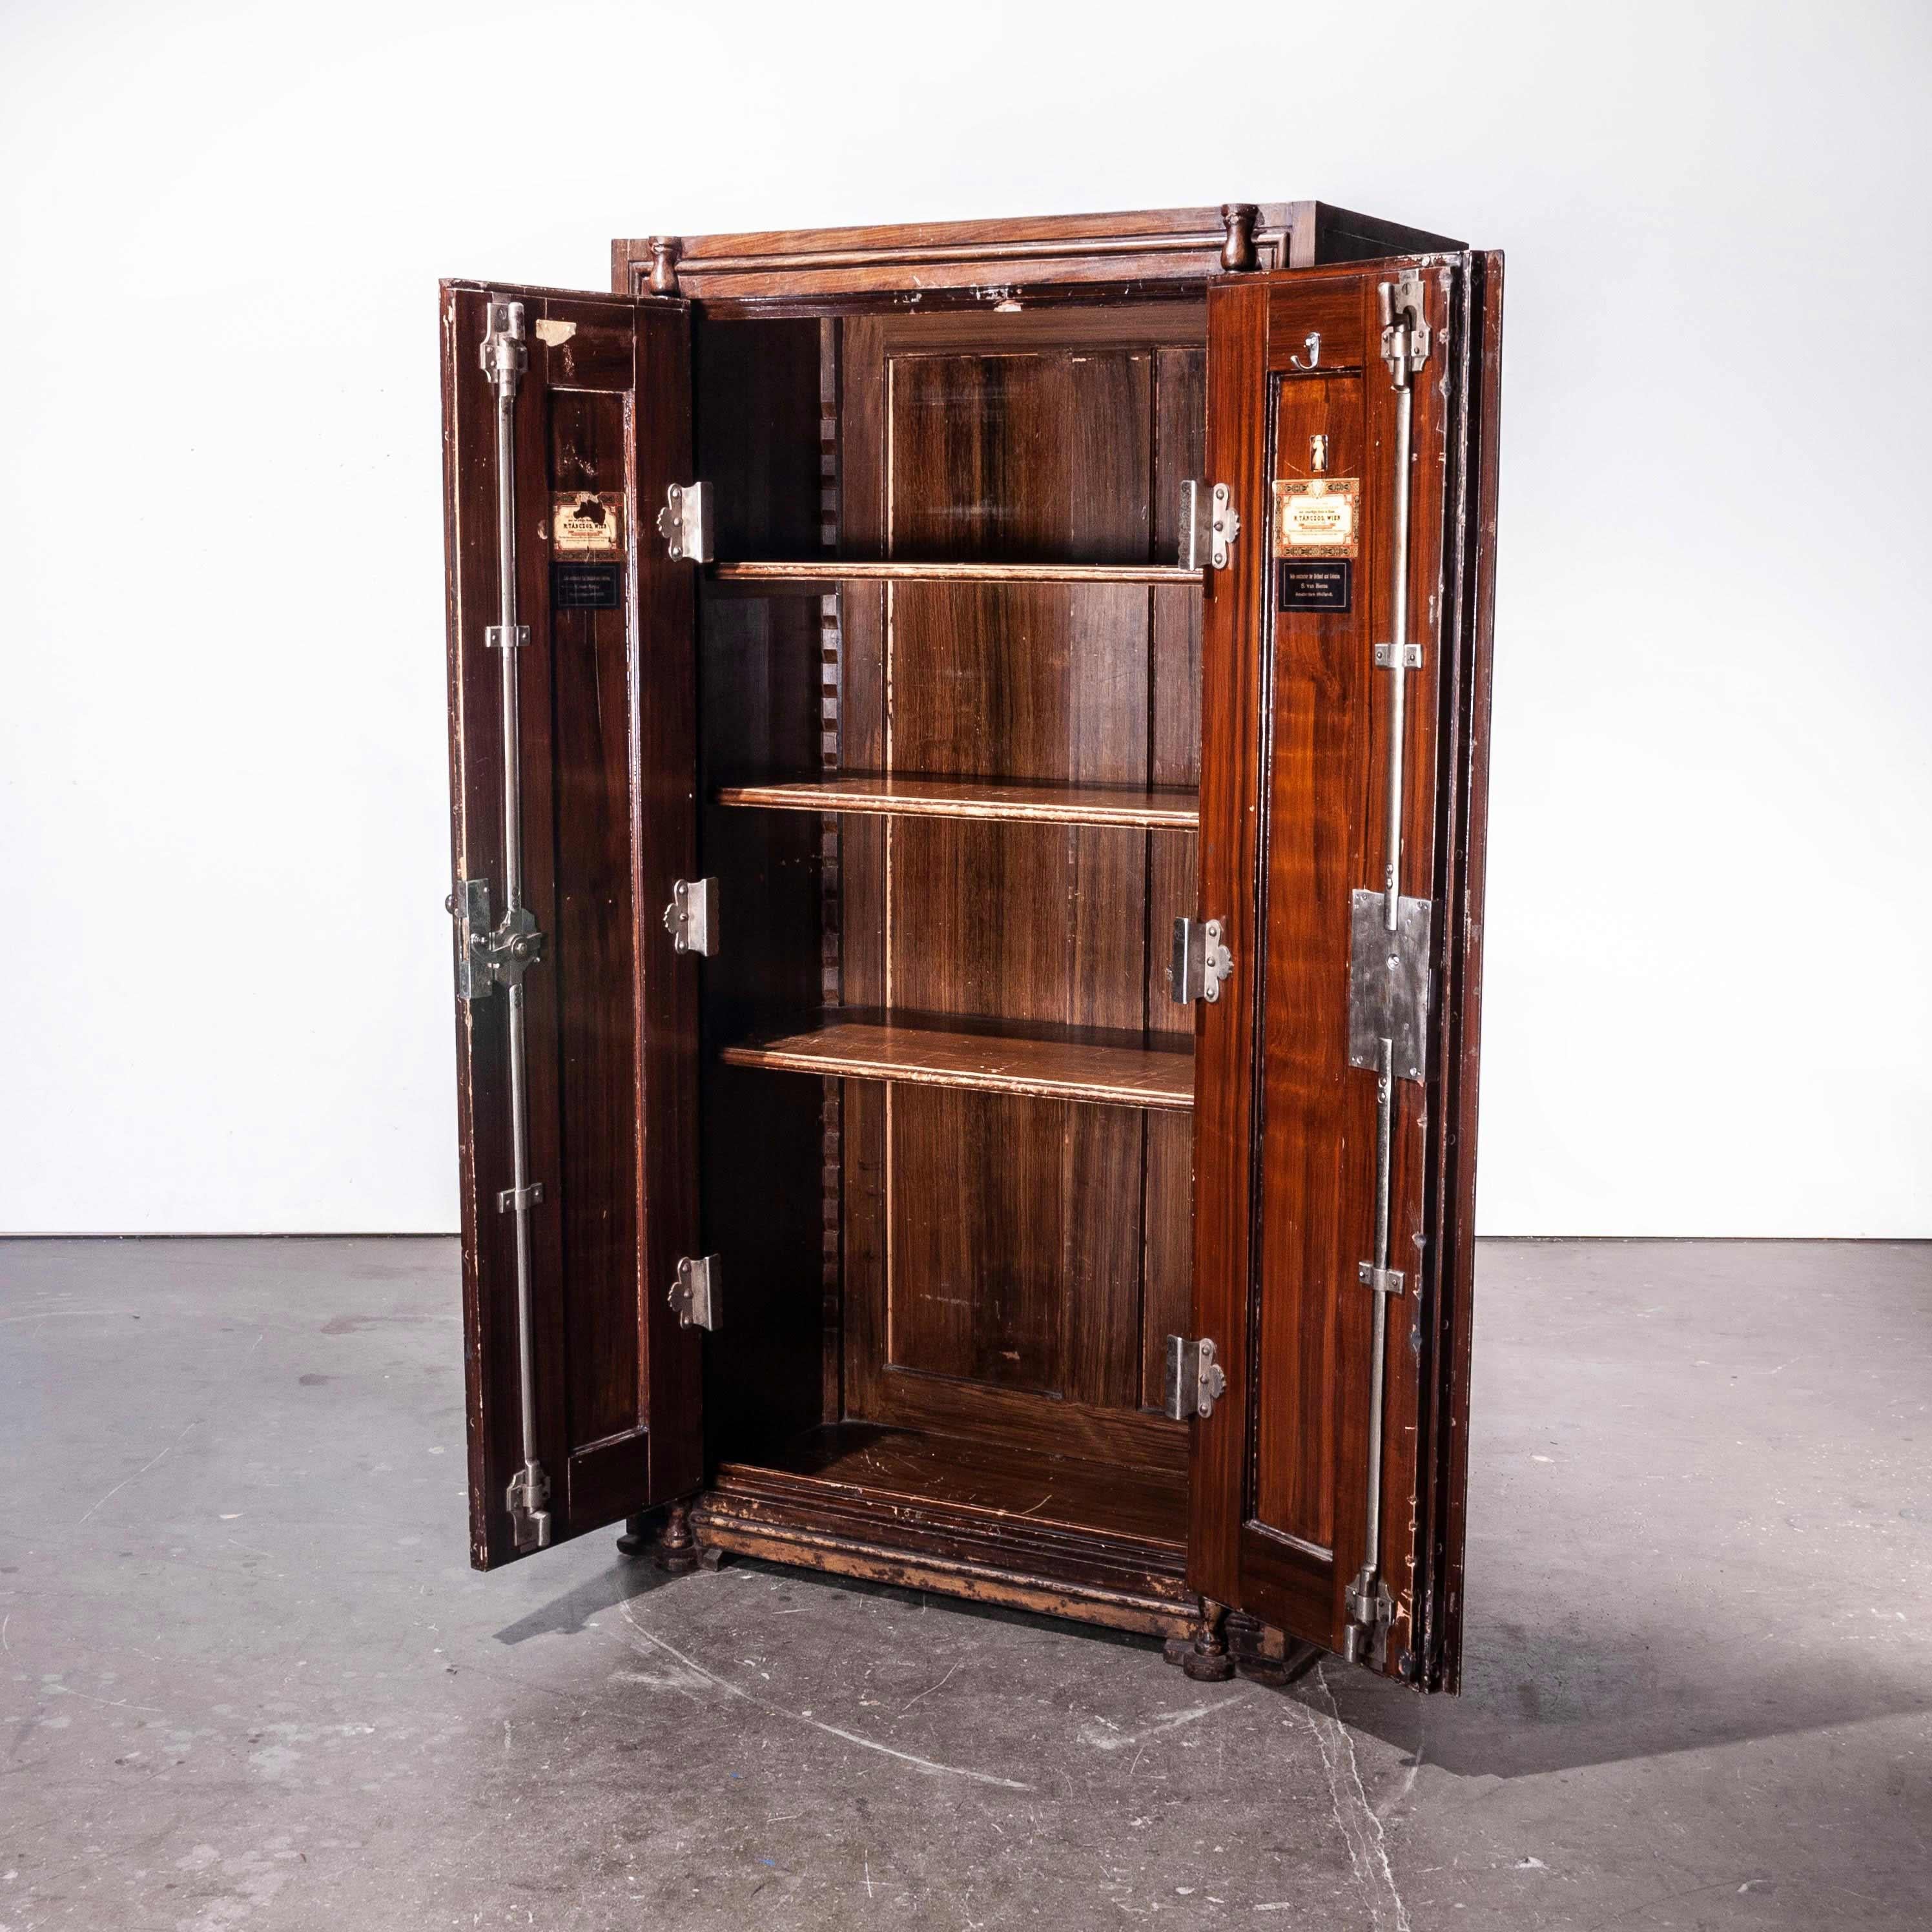 1890s Original Patented Fireproof Large Cabinet by Tanczos of Vienna For Sale 8